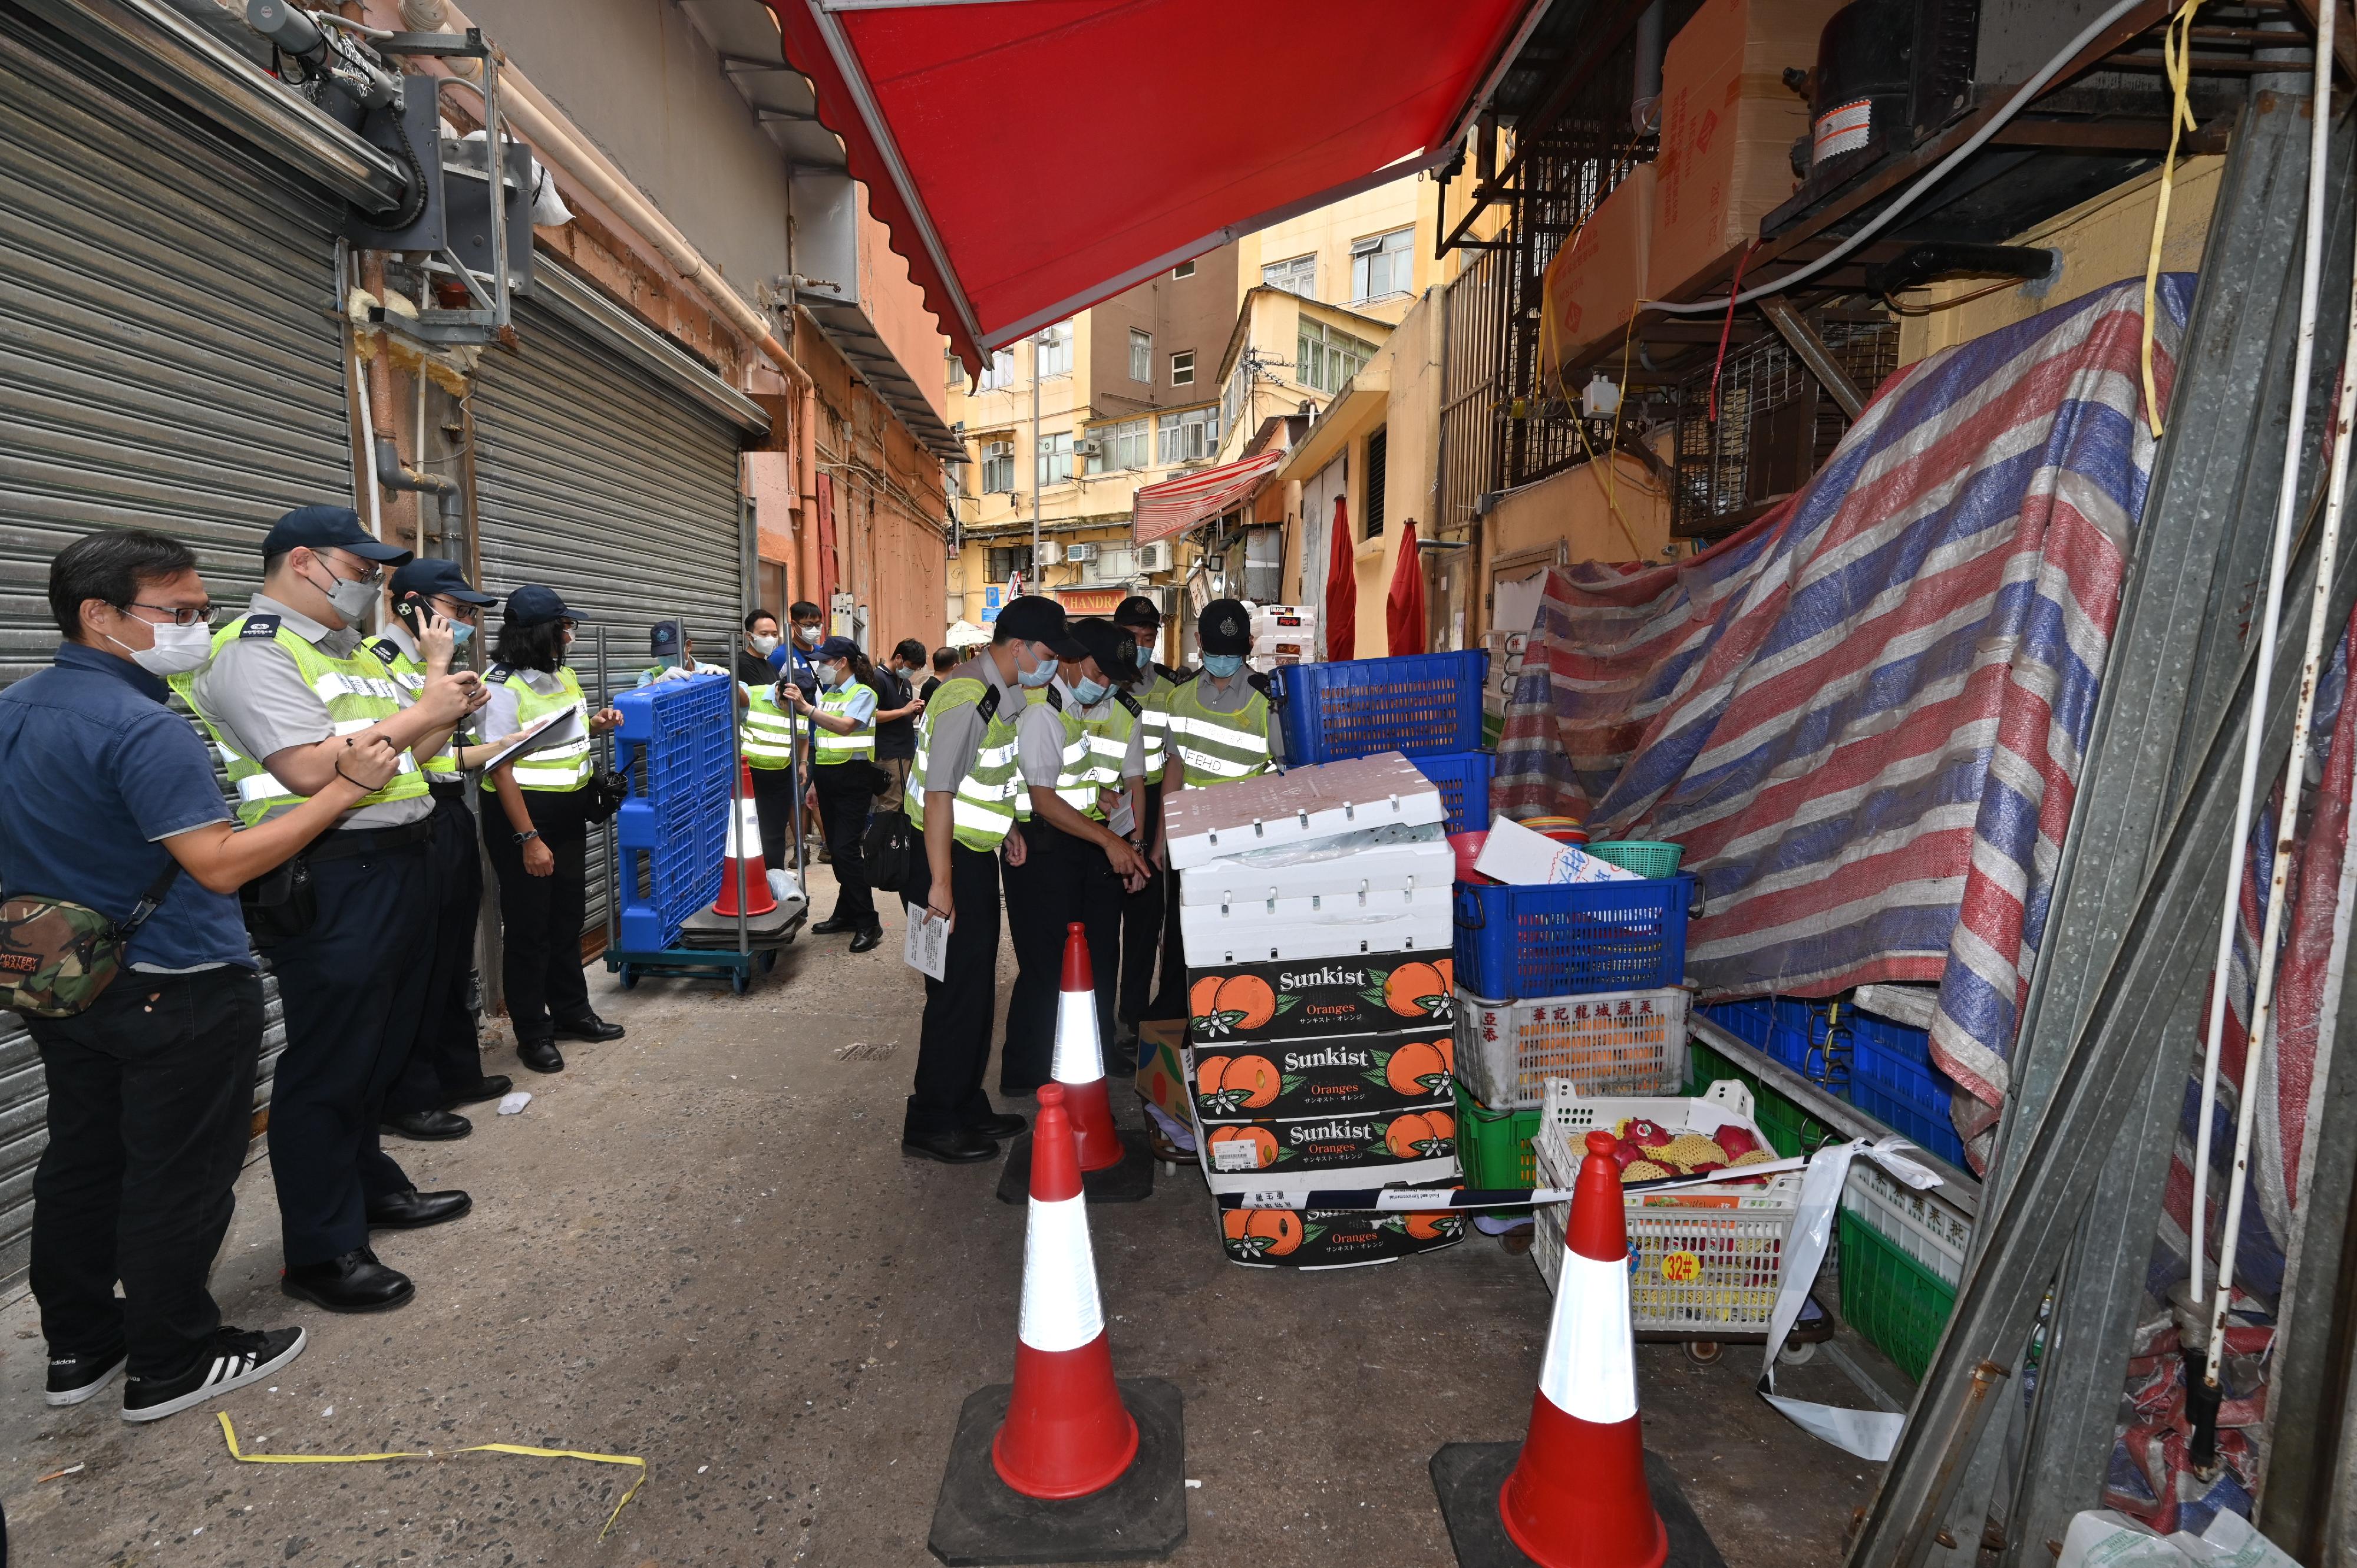 A spokesman for the Food and Environmental Hygiene Department (FEHD) said today (October 17) that the FEHD and the Hong Kong Police Force have conducted a series of stringent enforcement actions against illegal shop front extension activities in various districts since October 3. Photo shows the condition of a street in Tai Po District before a joint operation.